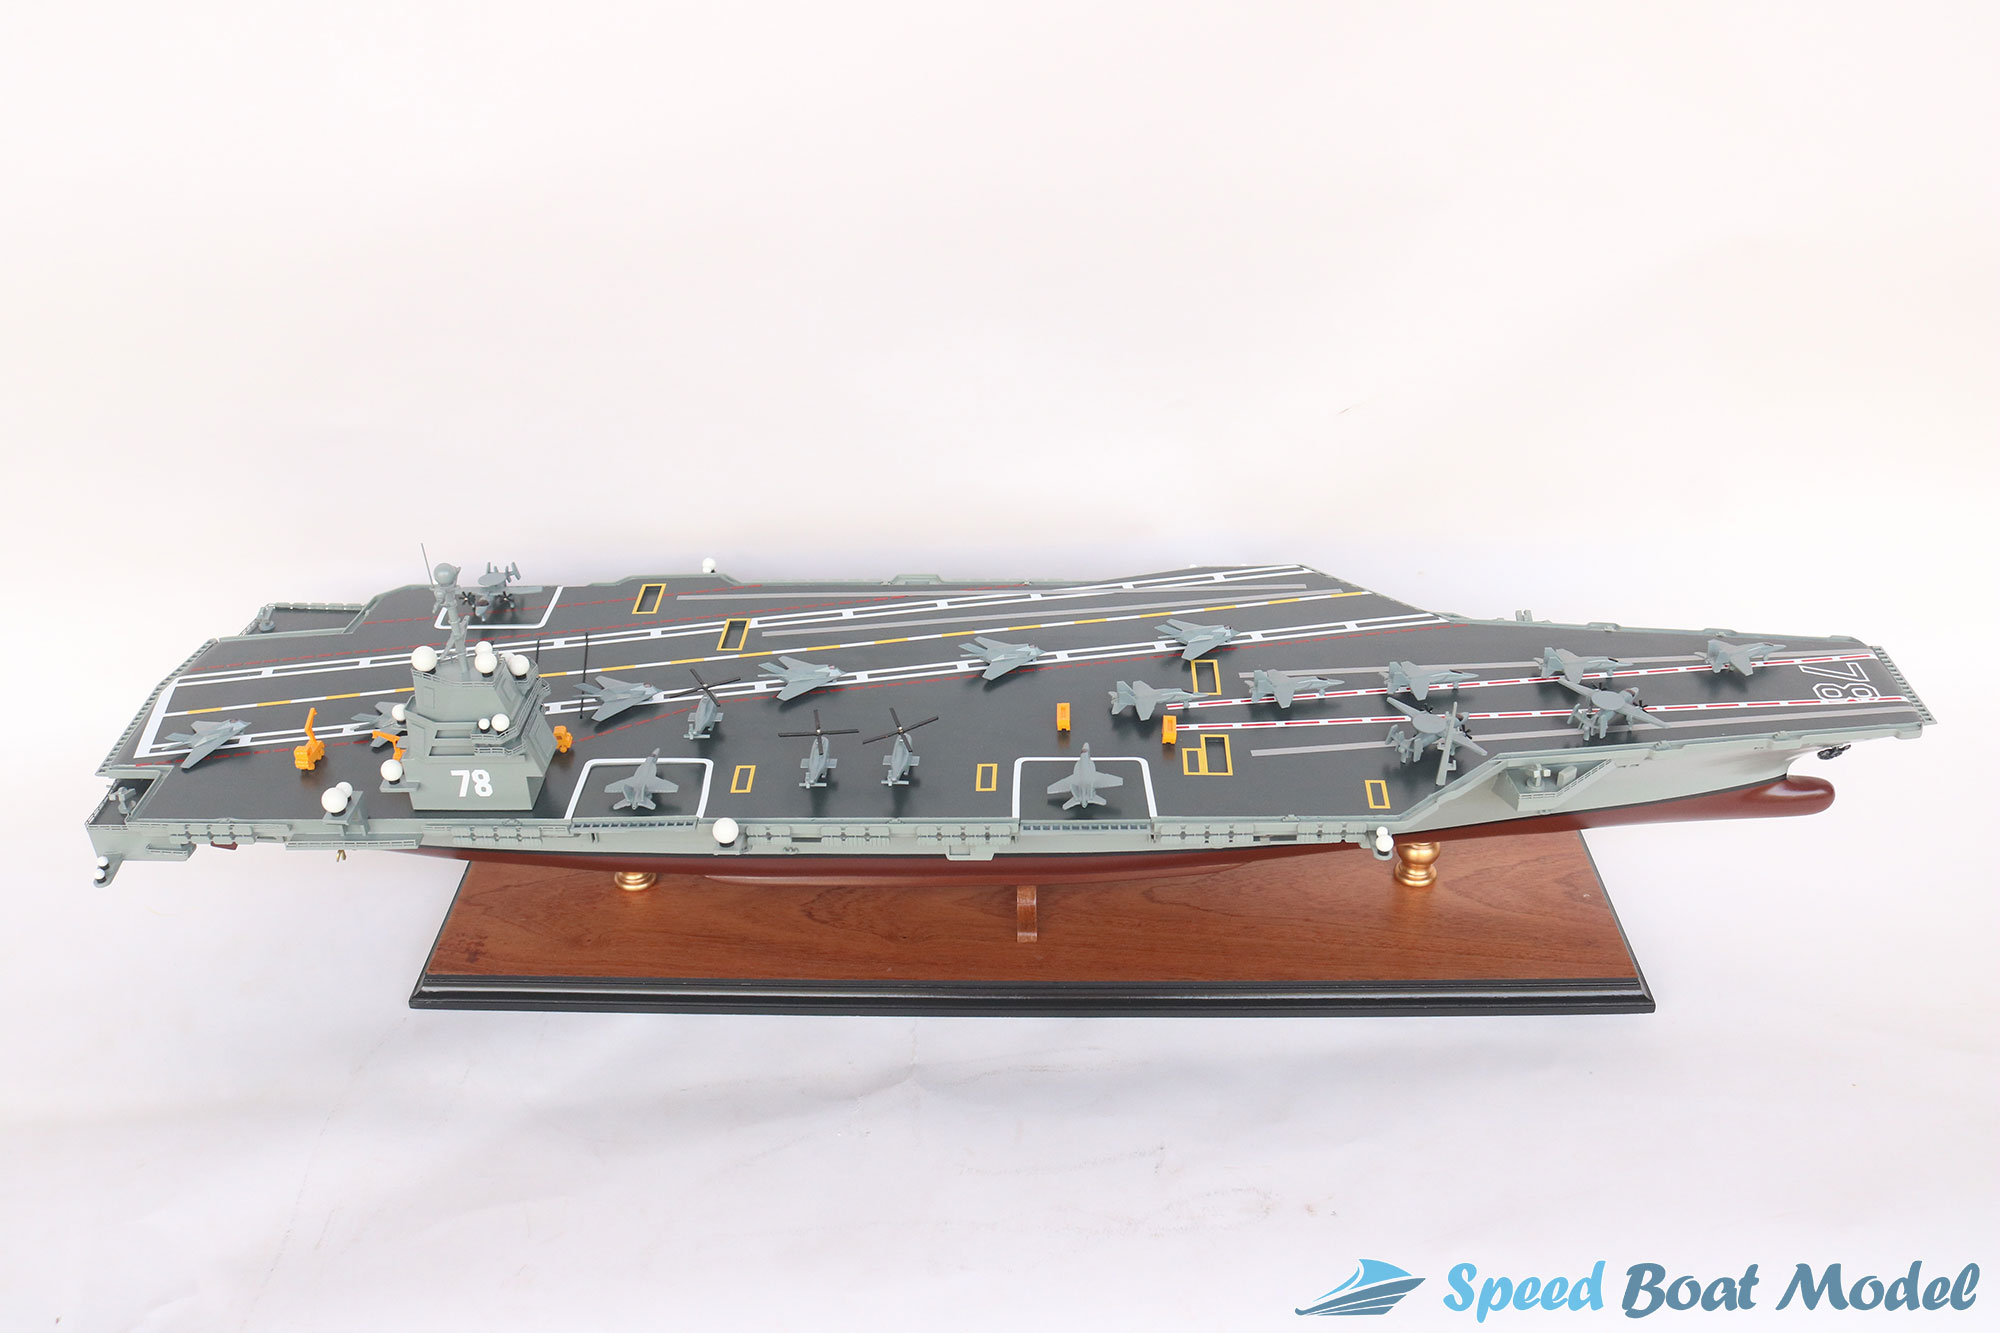 Aircraft Carrier Uss Gerald Ford Warship Model 38